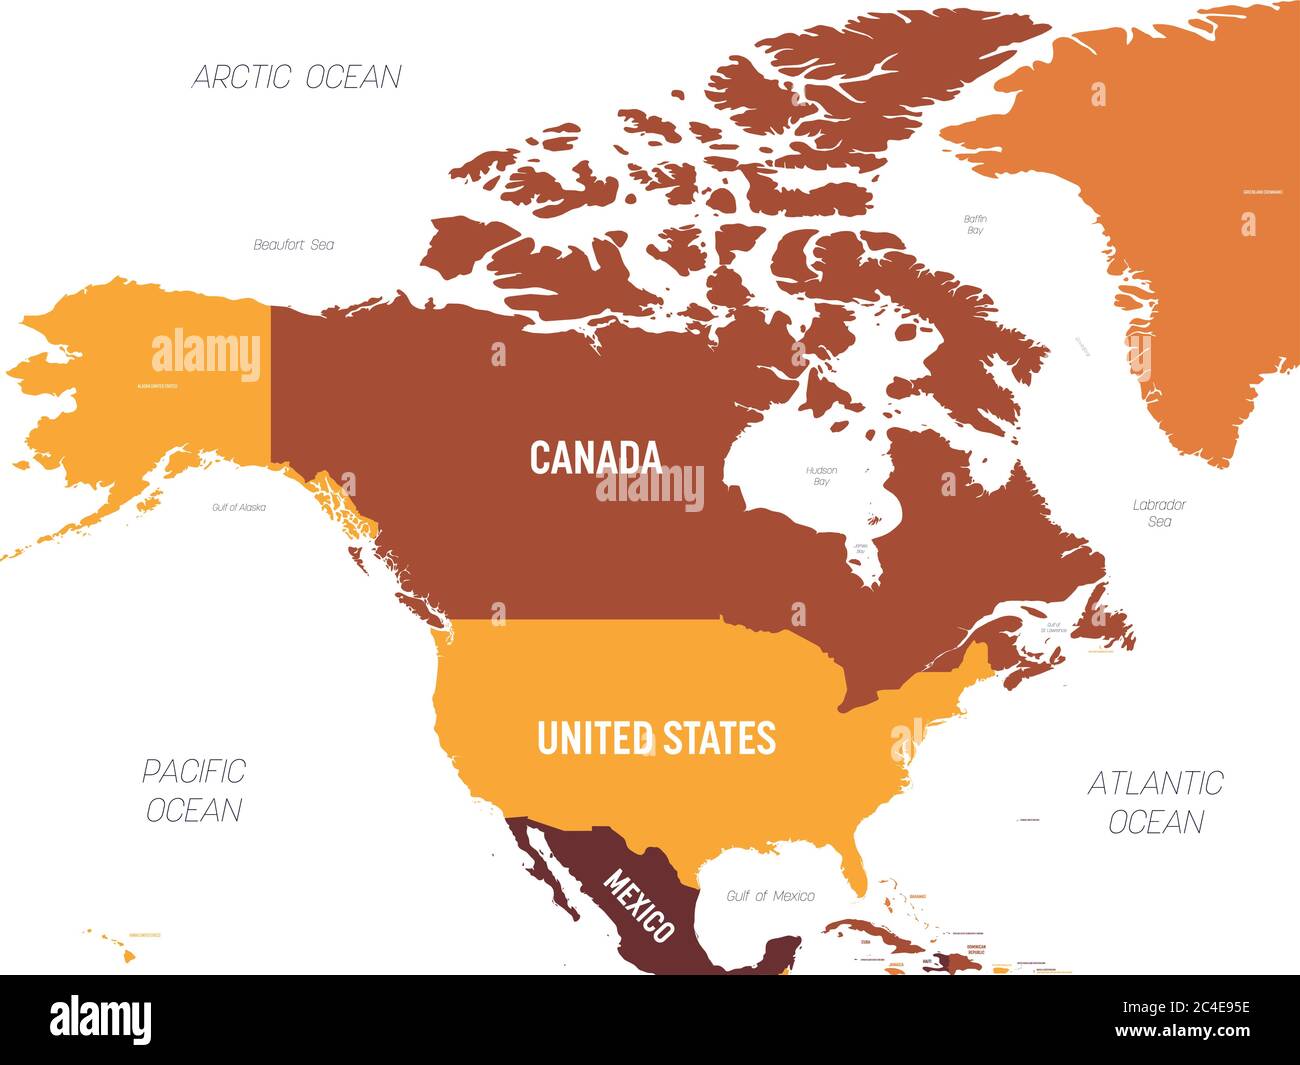 North America map - brown orange hue colored on dark background. High detailed political map North American continent with country, ocean and sea names labeling. Stock Vector